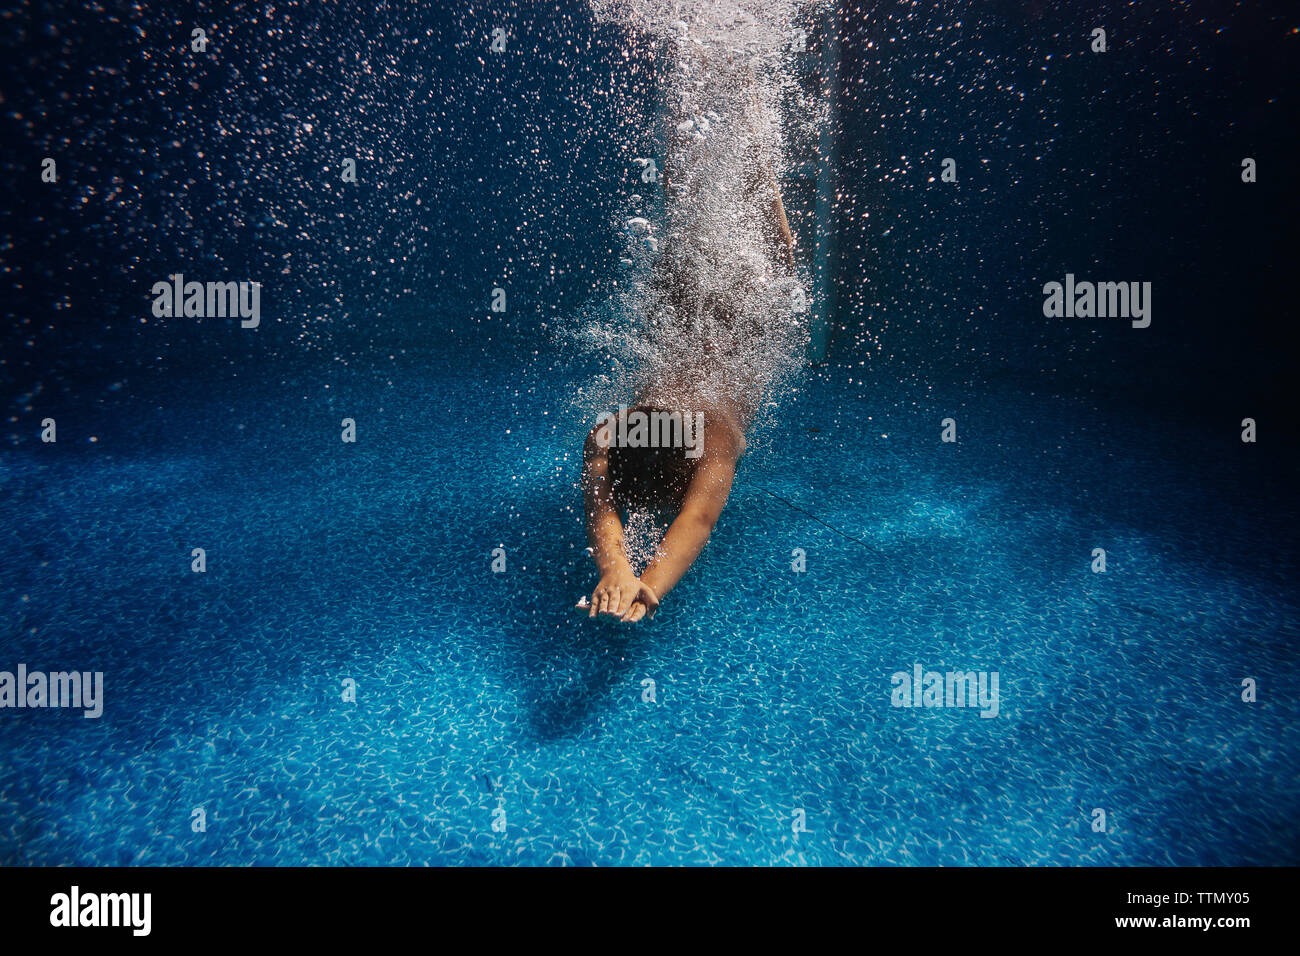 Boy diving in swimming pool Stock Photo